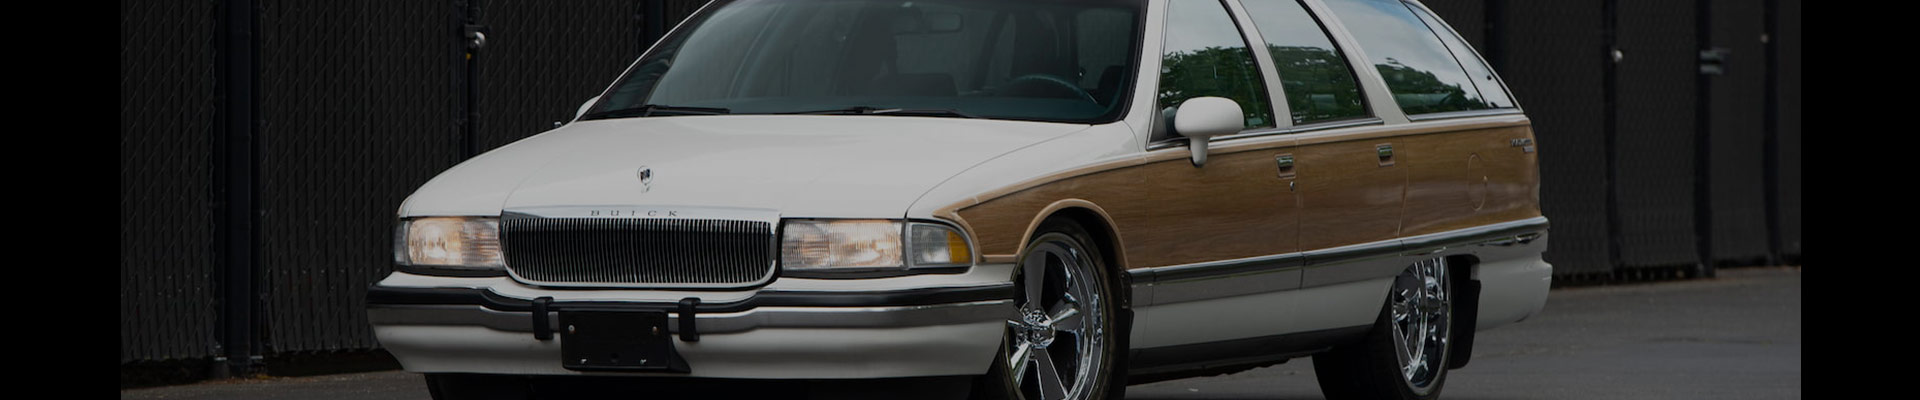 Shop Replacement and OEM 1991 Buick Roadmaster Parts with Discounted Price on the Net